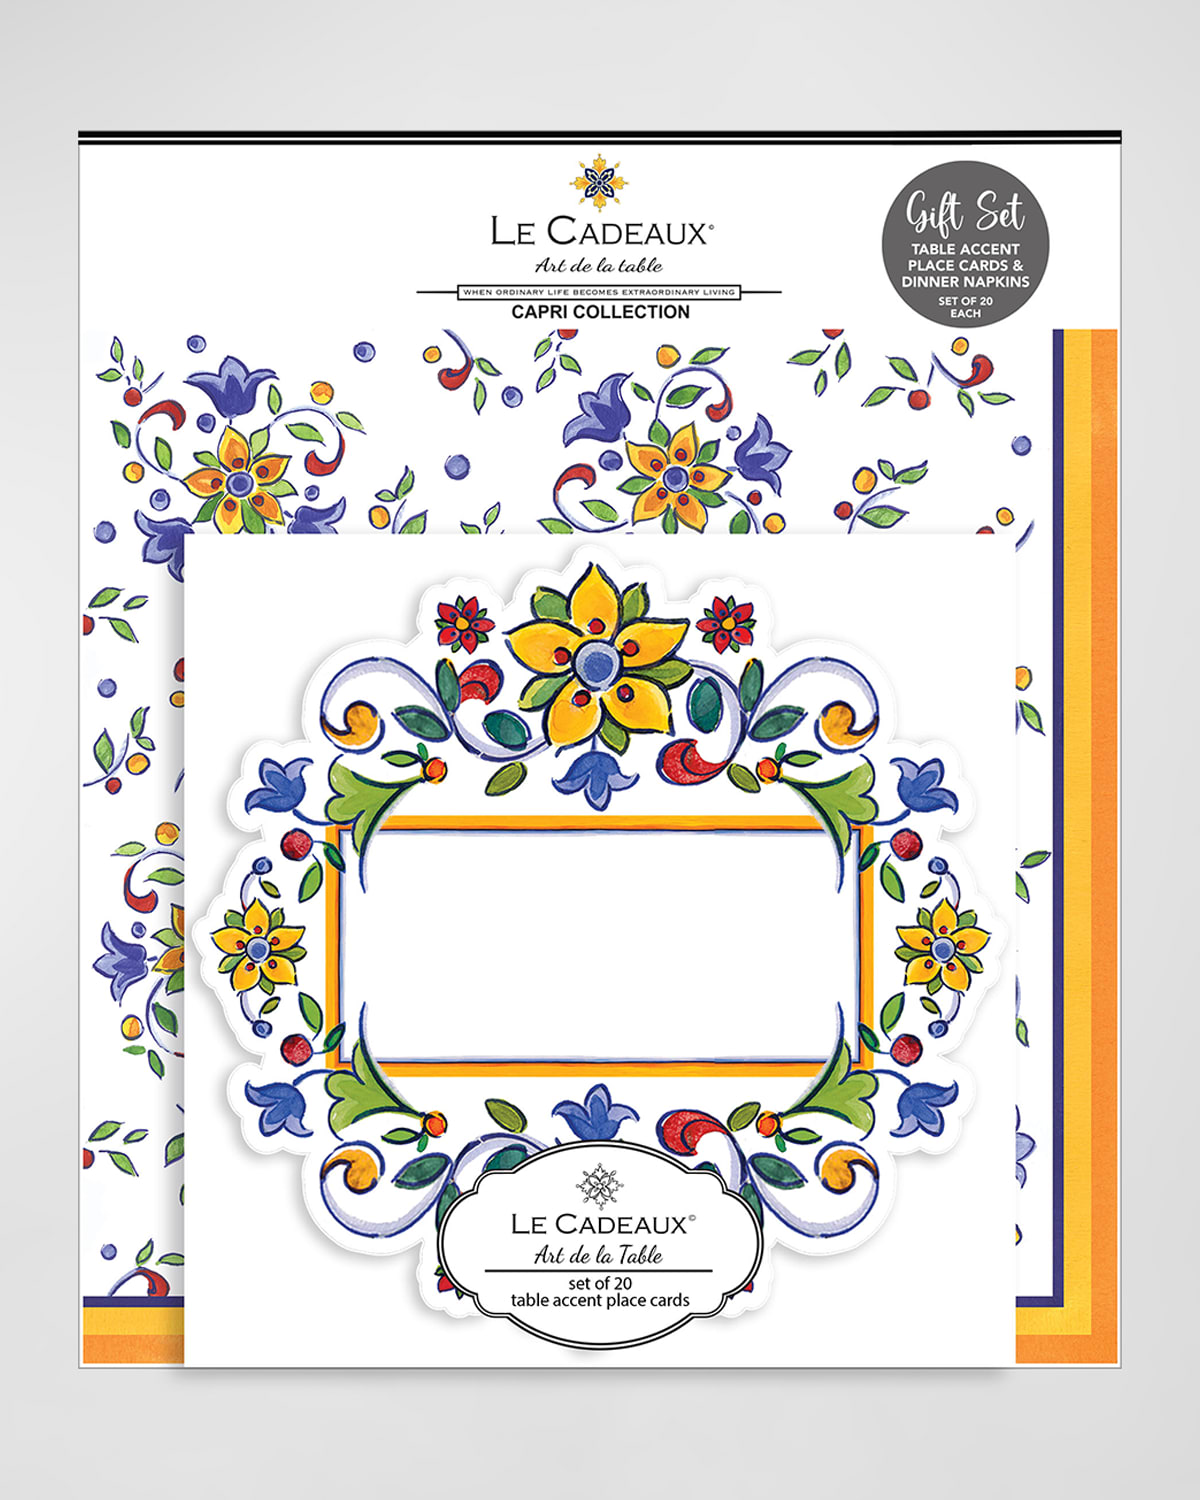 Le Cadeaux Table Accent Place Cards And Dinner Napkins Gift Set